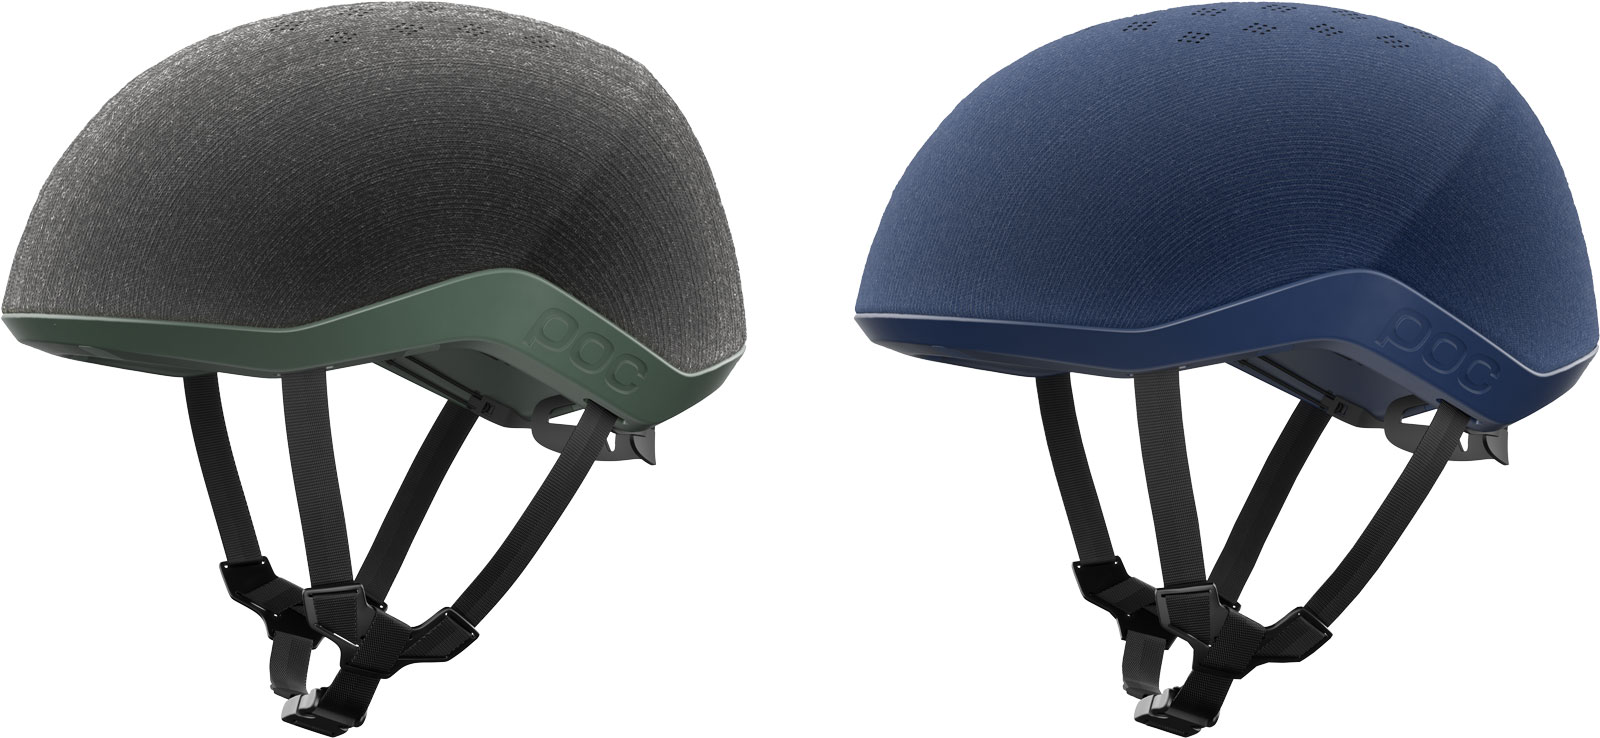 poc-myelin-commuter-helmet-everyday-cycling-recycled-materials-deconstructable-recyclable.jpg